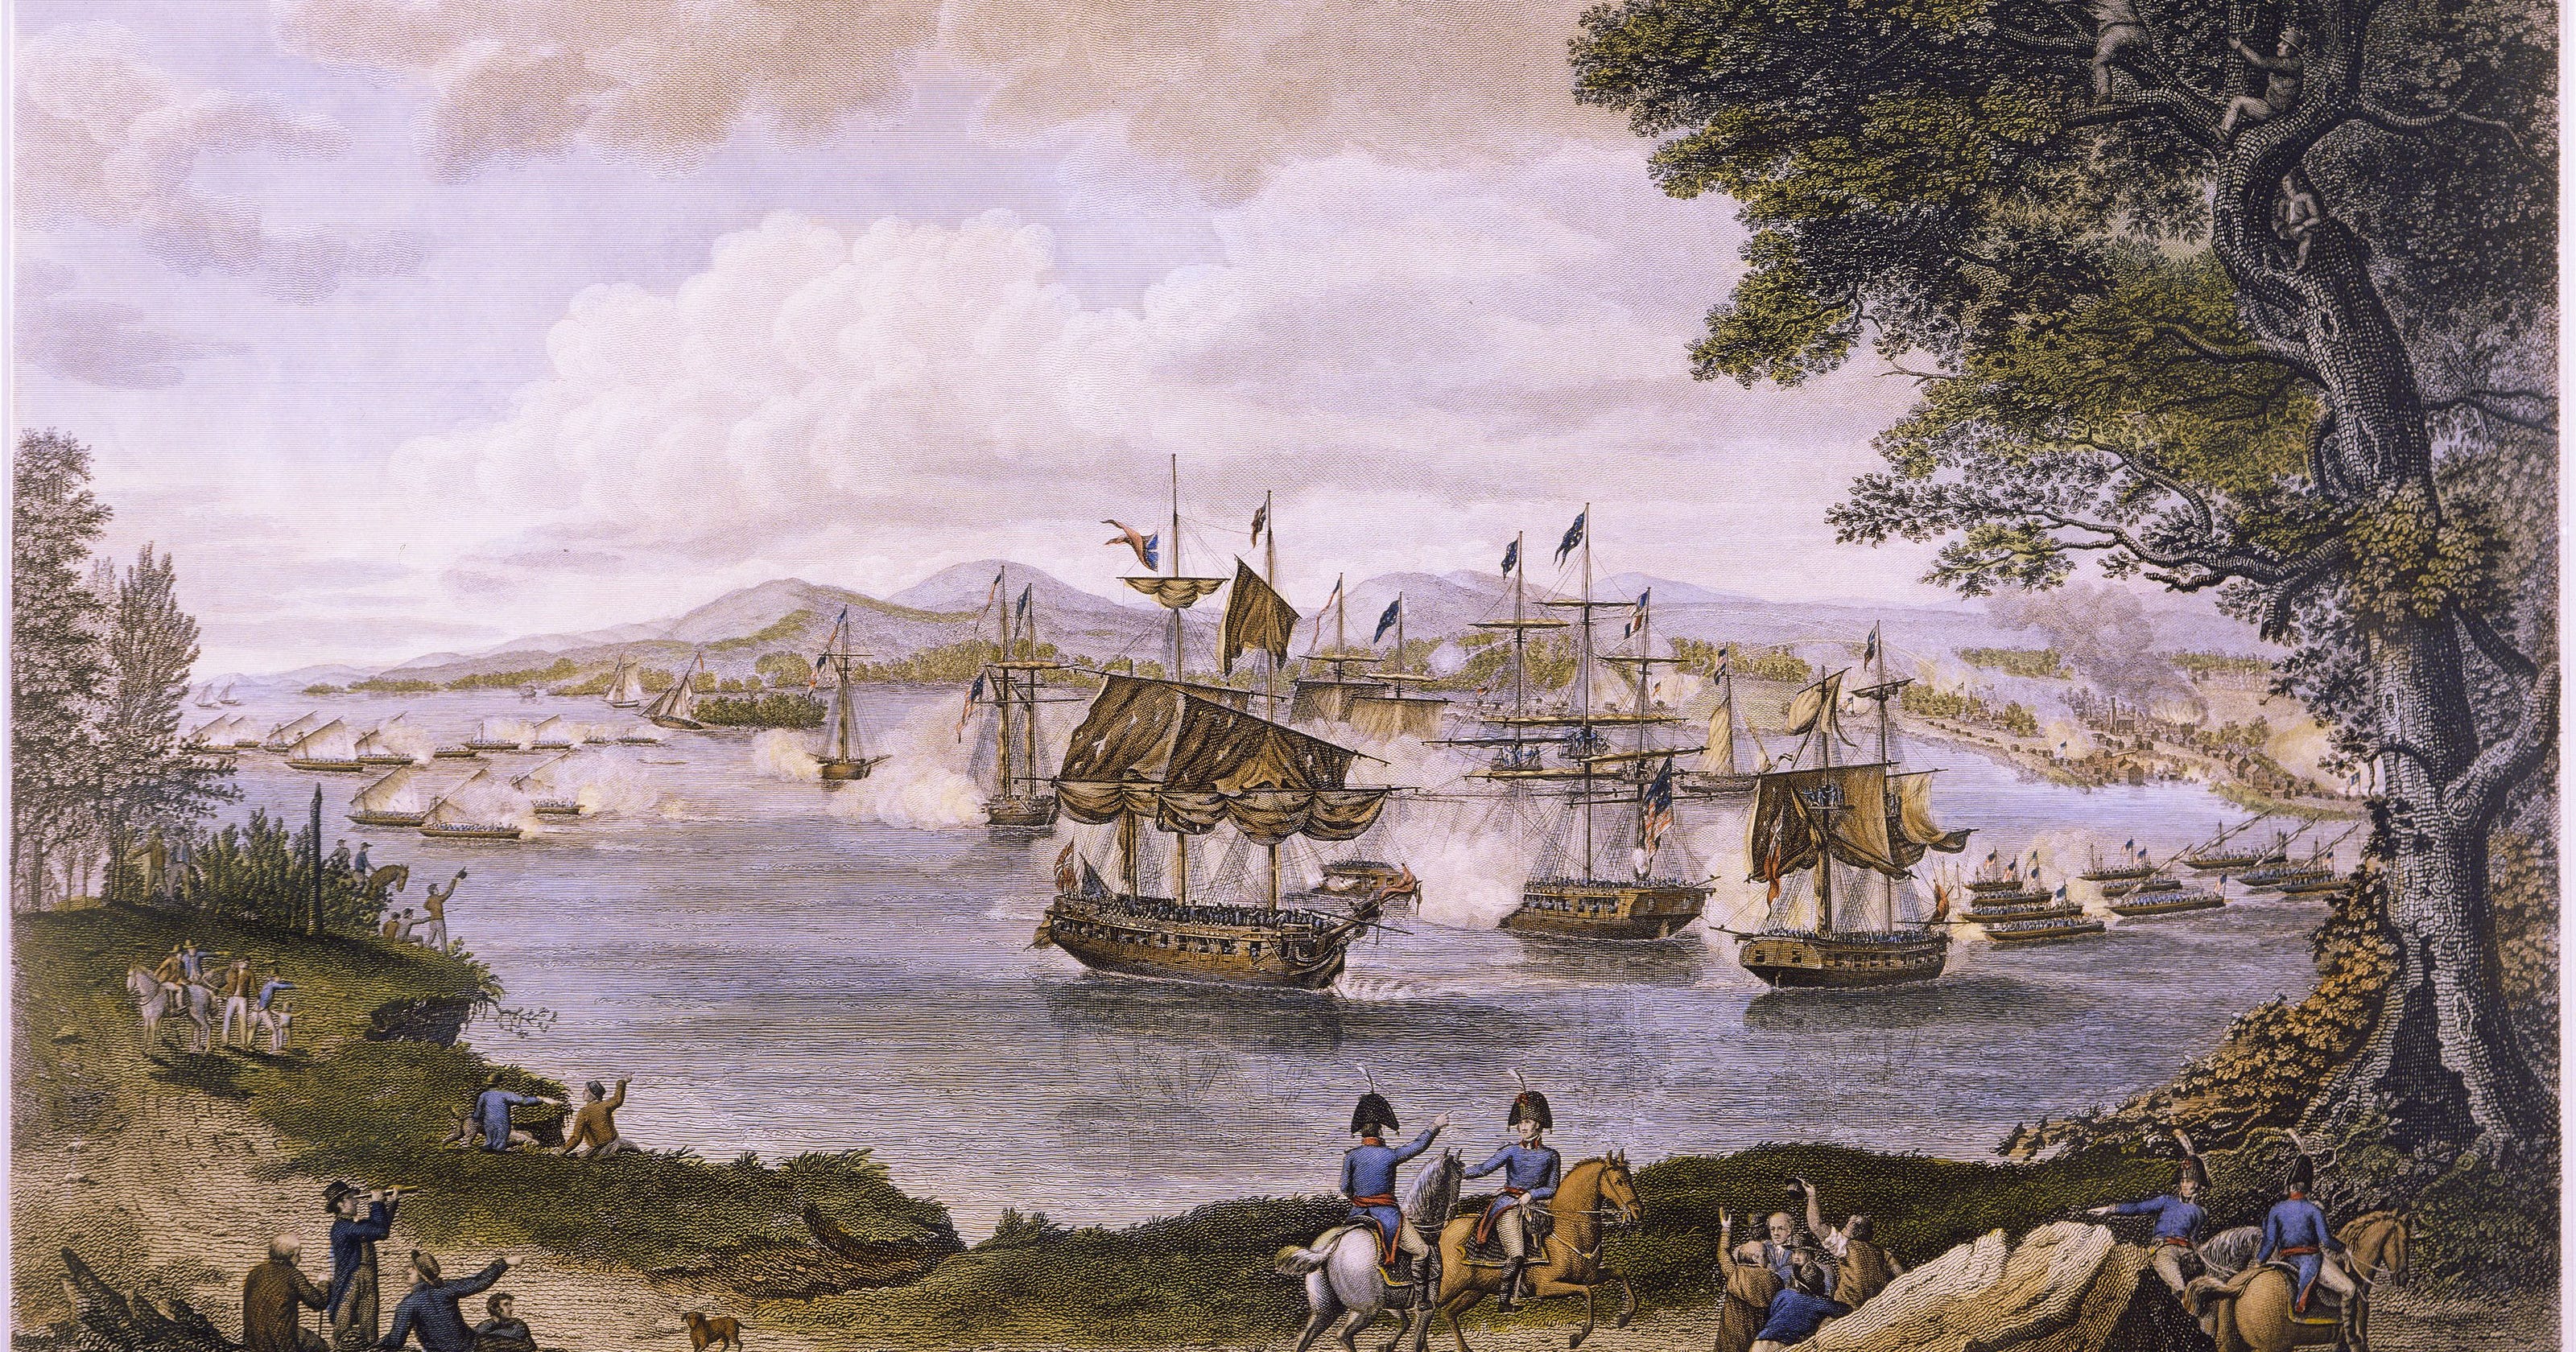 Picture of the Battle of Plattsburgh